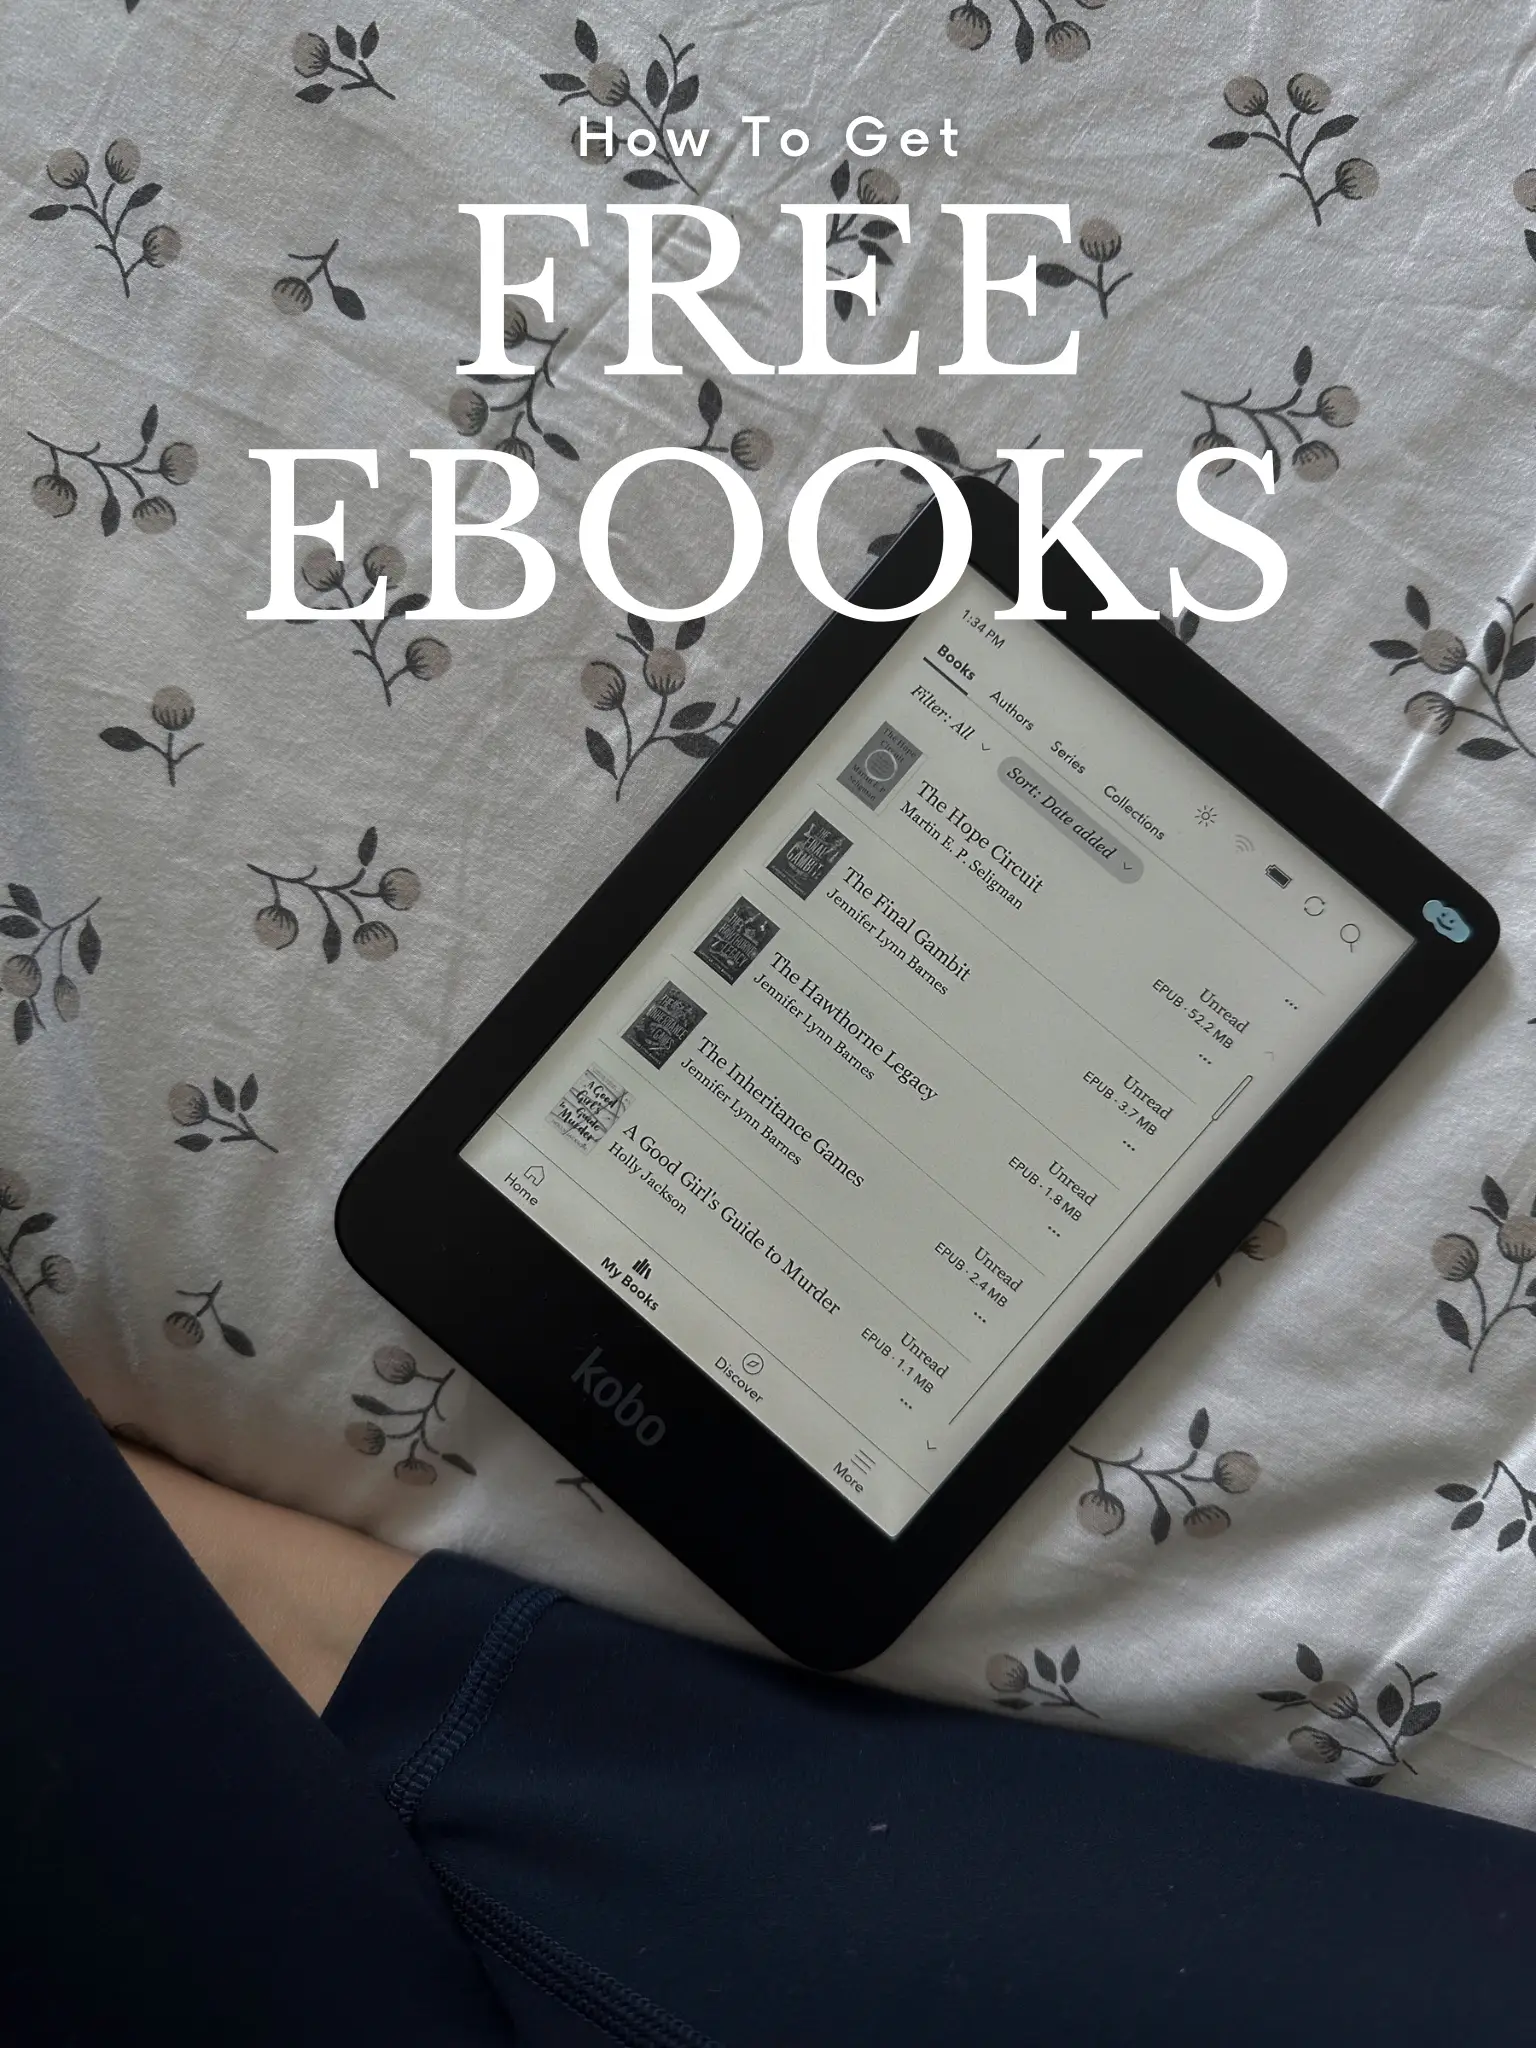  Free ebooks: How to download an ebook for free, choose from six  million titles eBook : Kelvin, W: Kindle Store